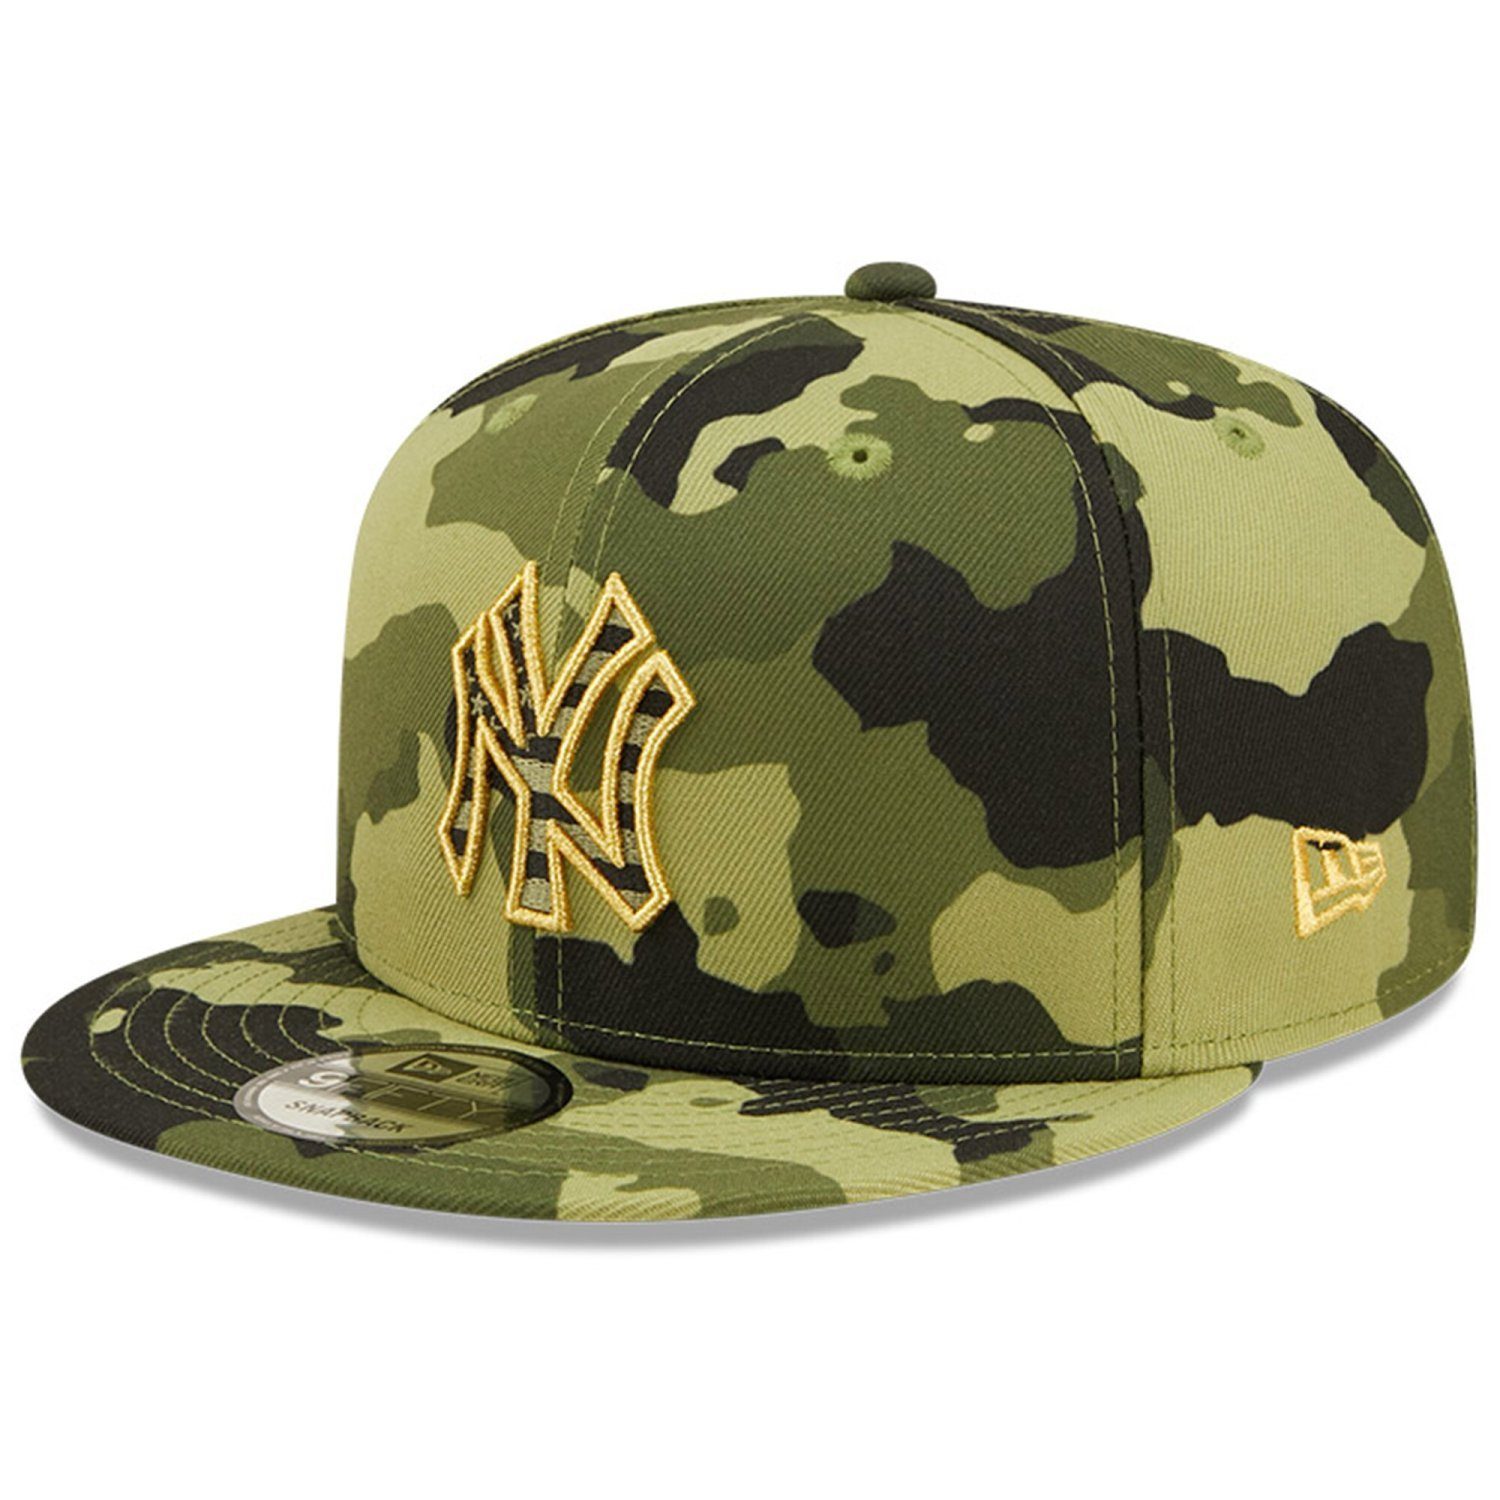 New Era Yankees Snapback Cap New York Day Armed Forces